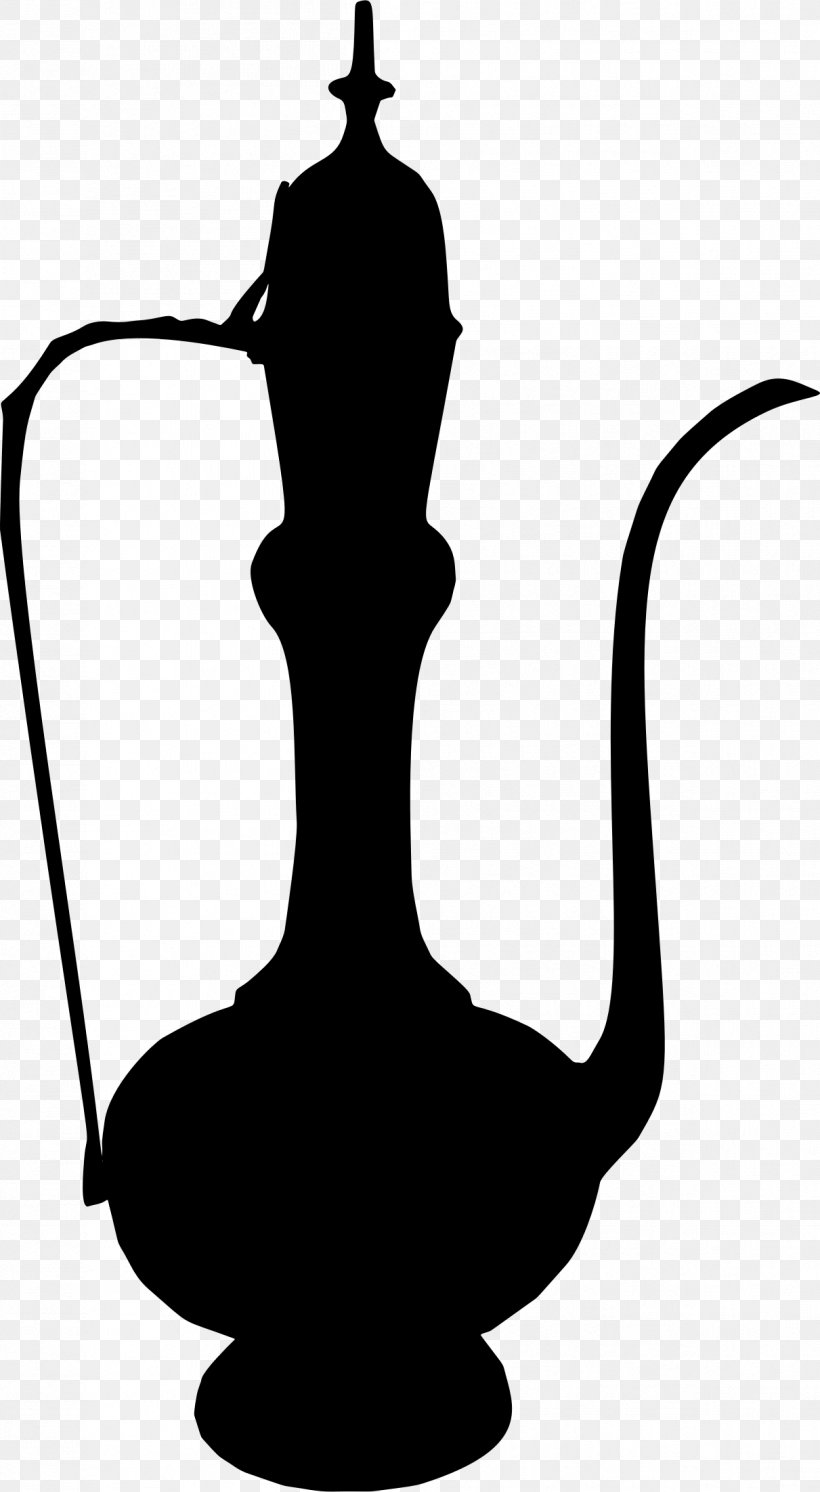 Pitcher Silhouette Jug Clip Art, PNG, 1211x2204px, Pitcher, Artwork, Barrel, Beer, Black And White Download Free